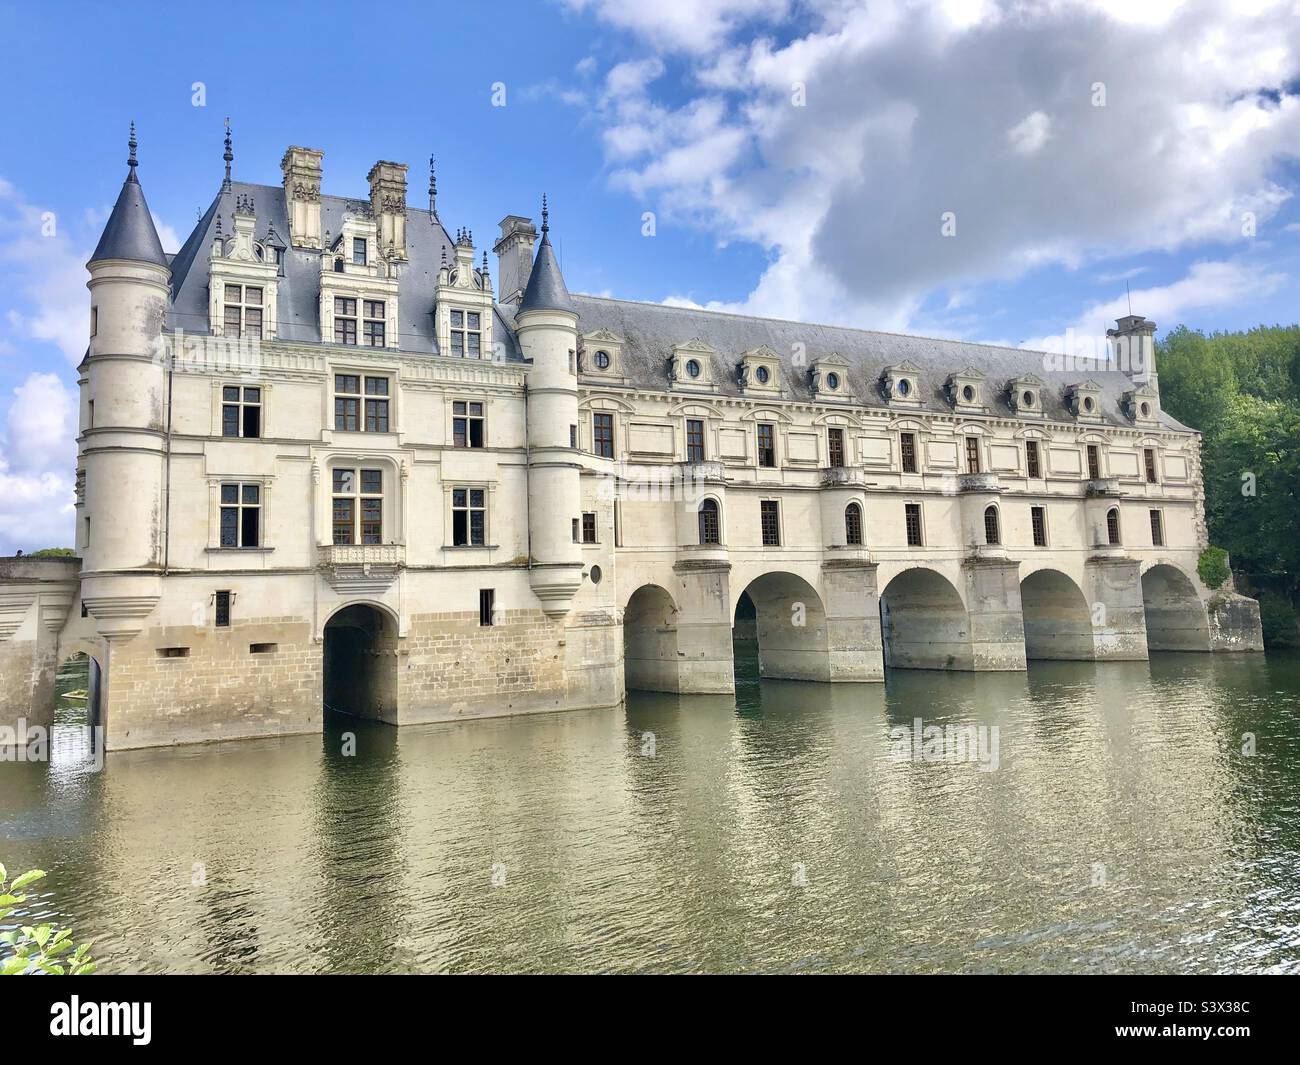 Château de Chenonceau, the Loire Valley. This beautiful château spans the river Cher, a tributary of the river Loire. Stock Photo